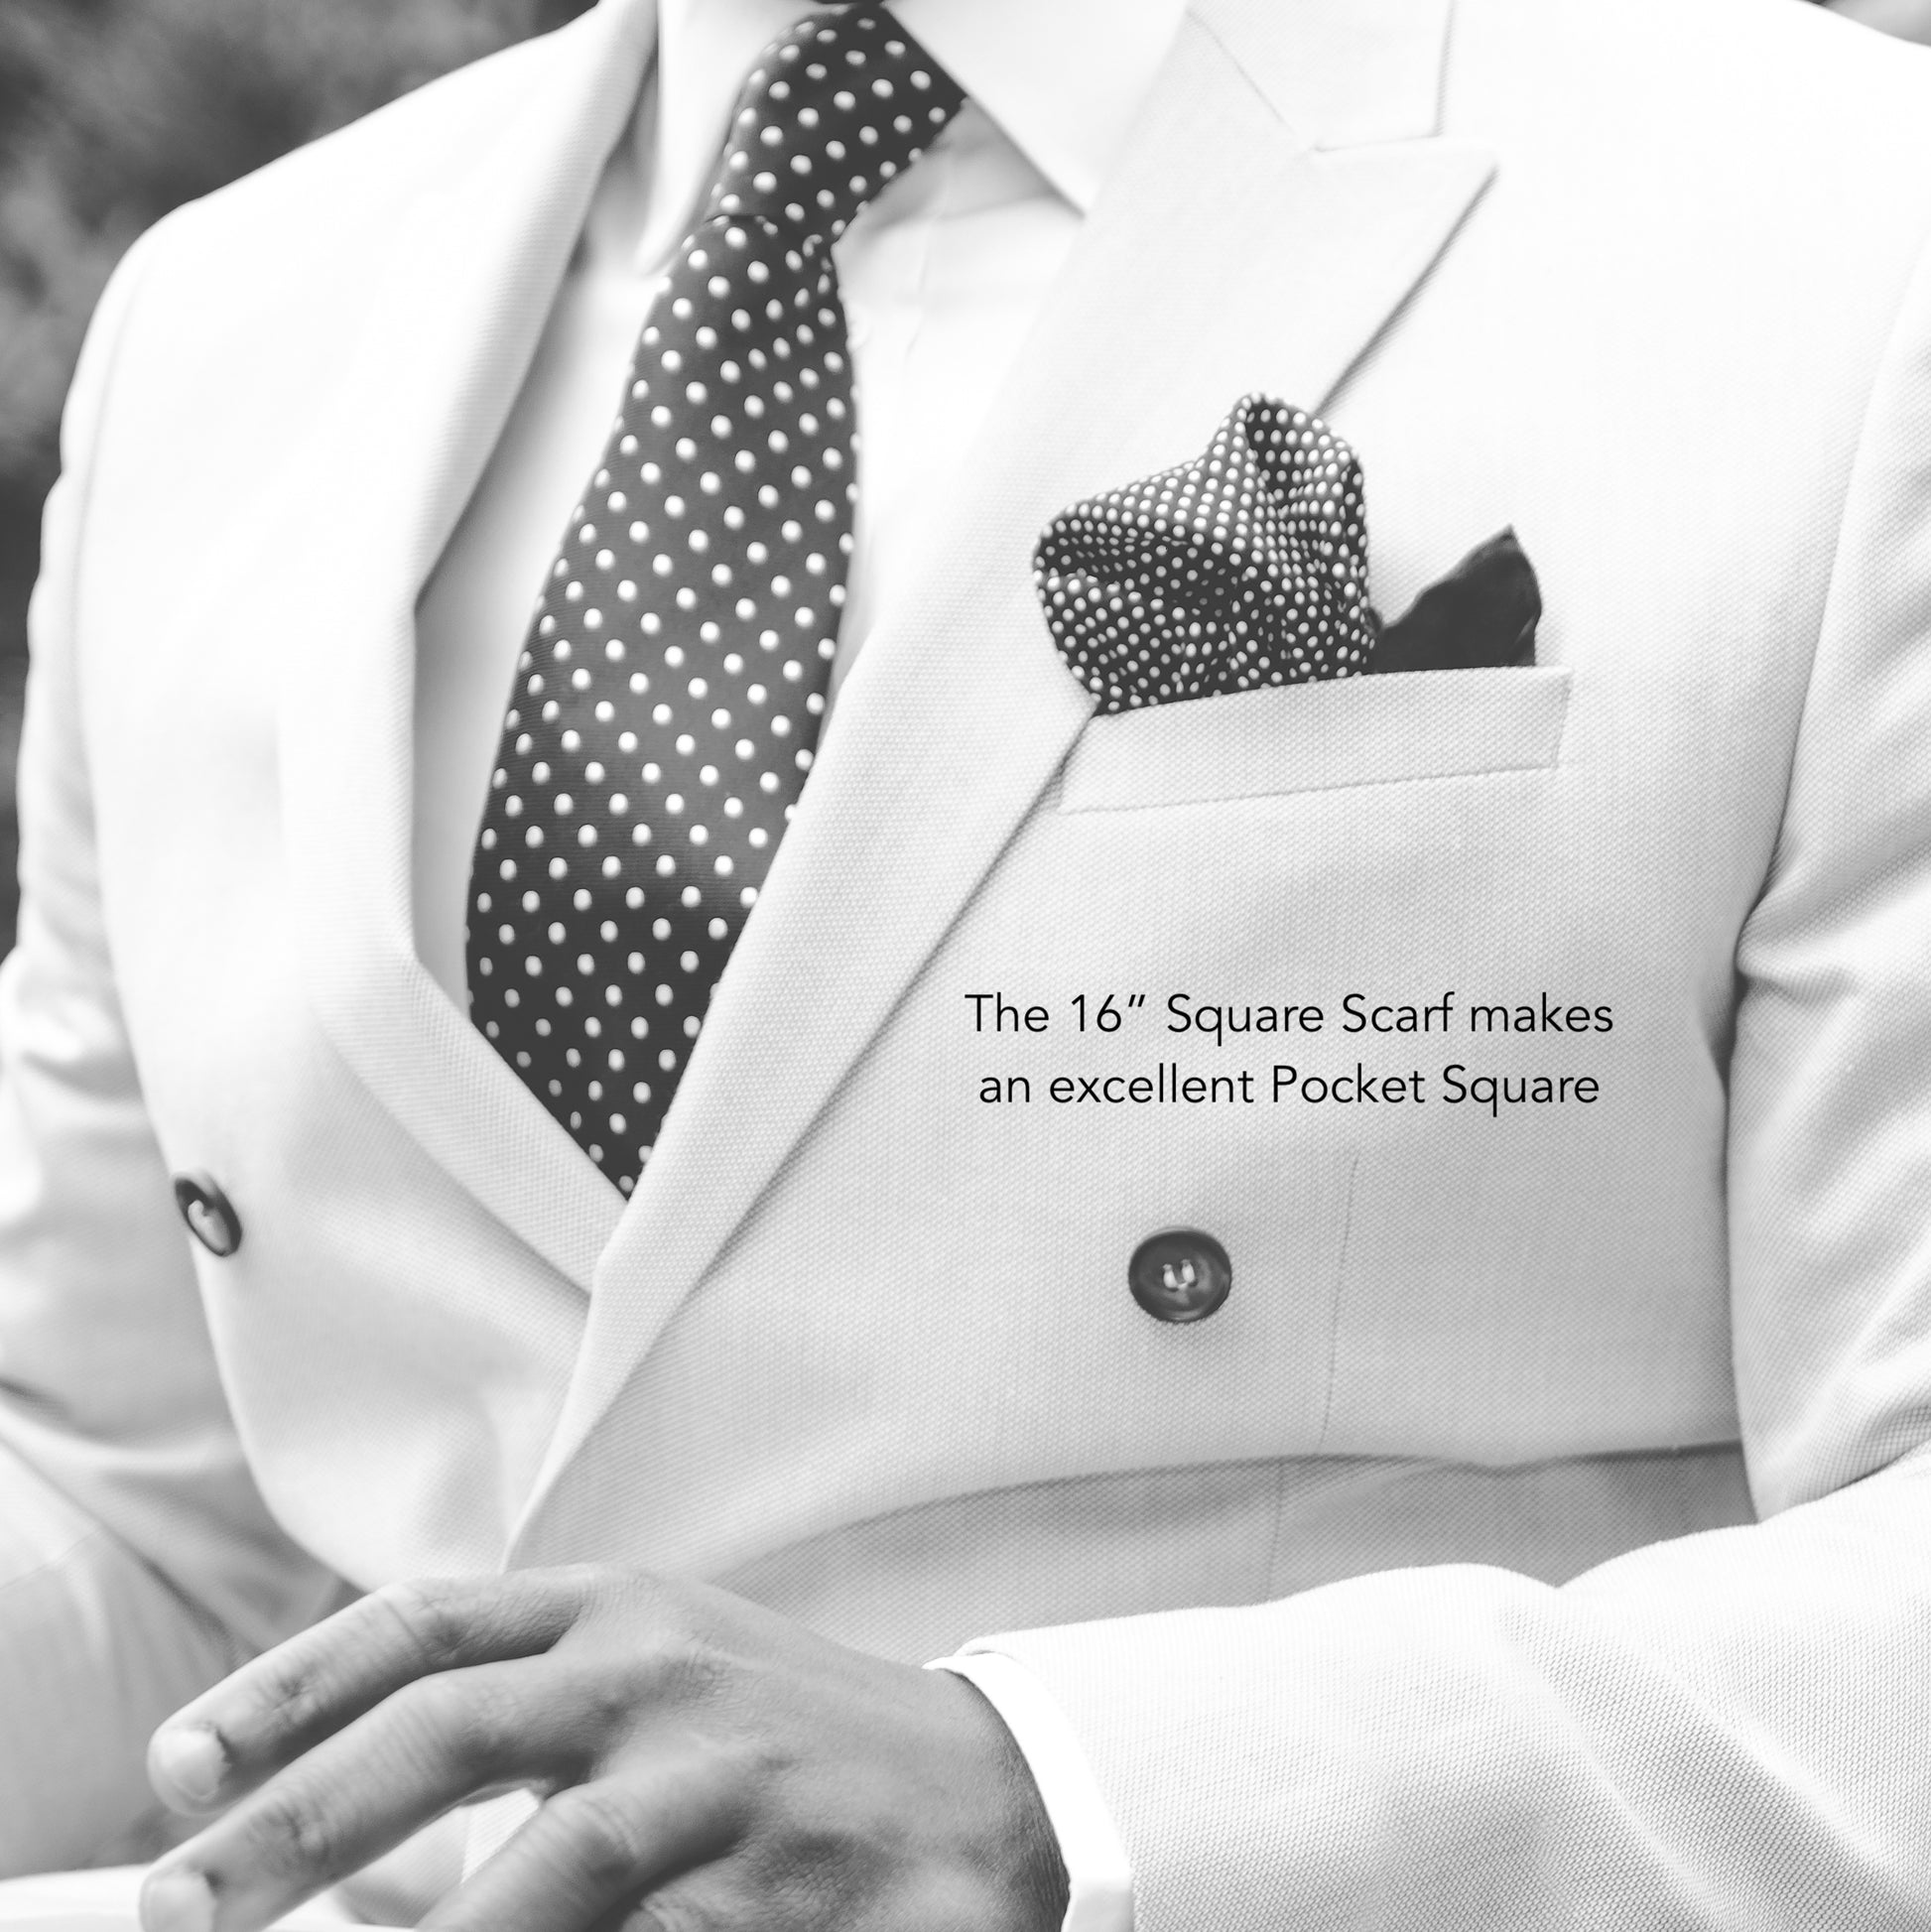 16 inch square scarf shown worn as a men's pocket square